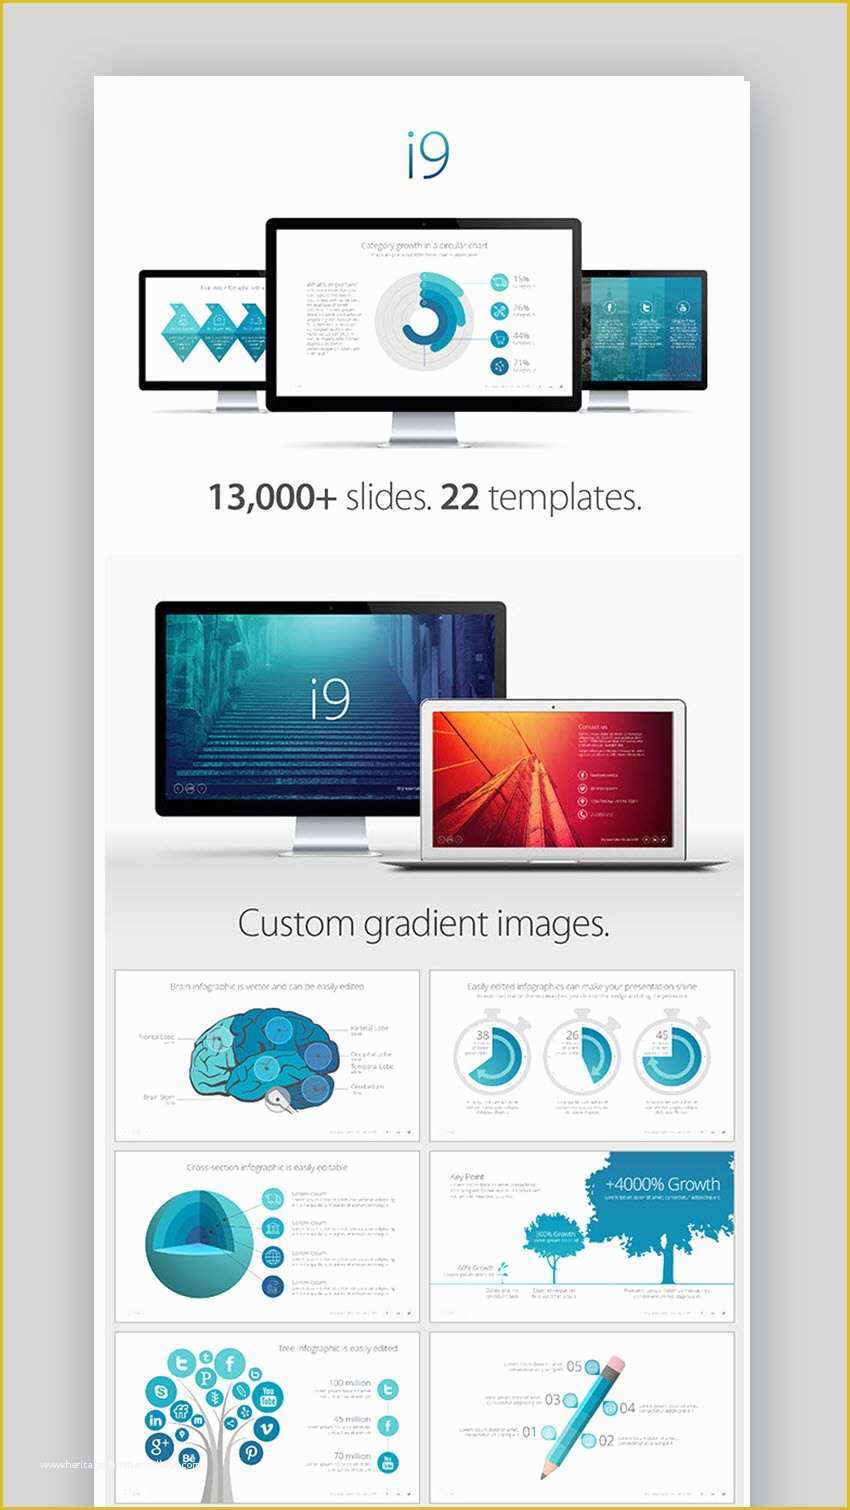 Microsoft Powerpoint Templates Free Download Of 25 Free Microsoft Powerpoint Templates to Download now